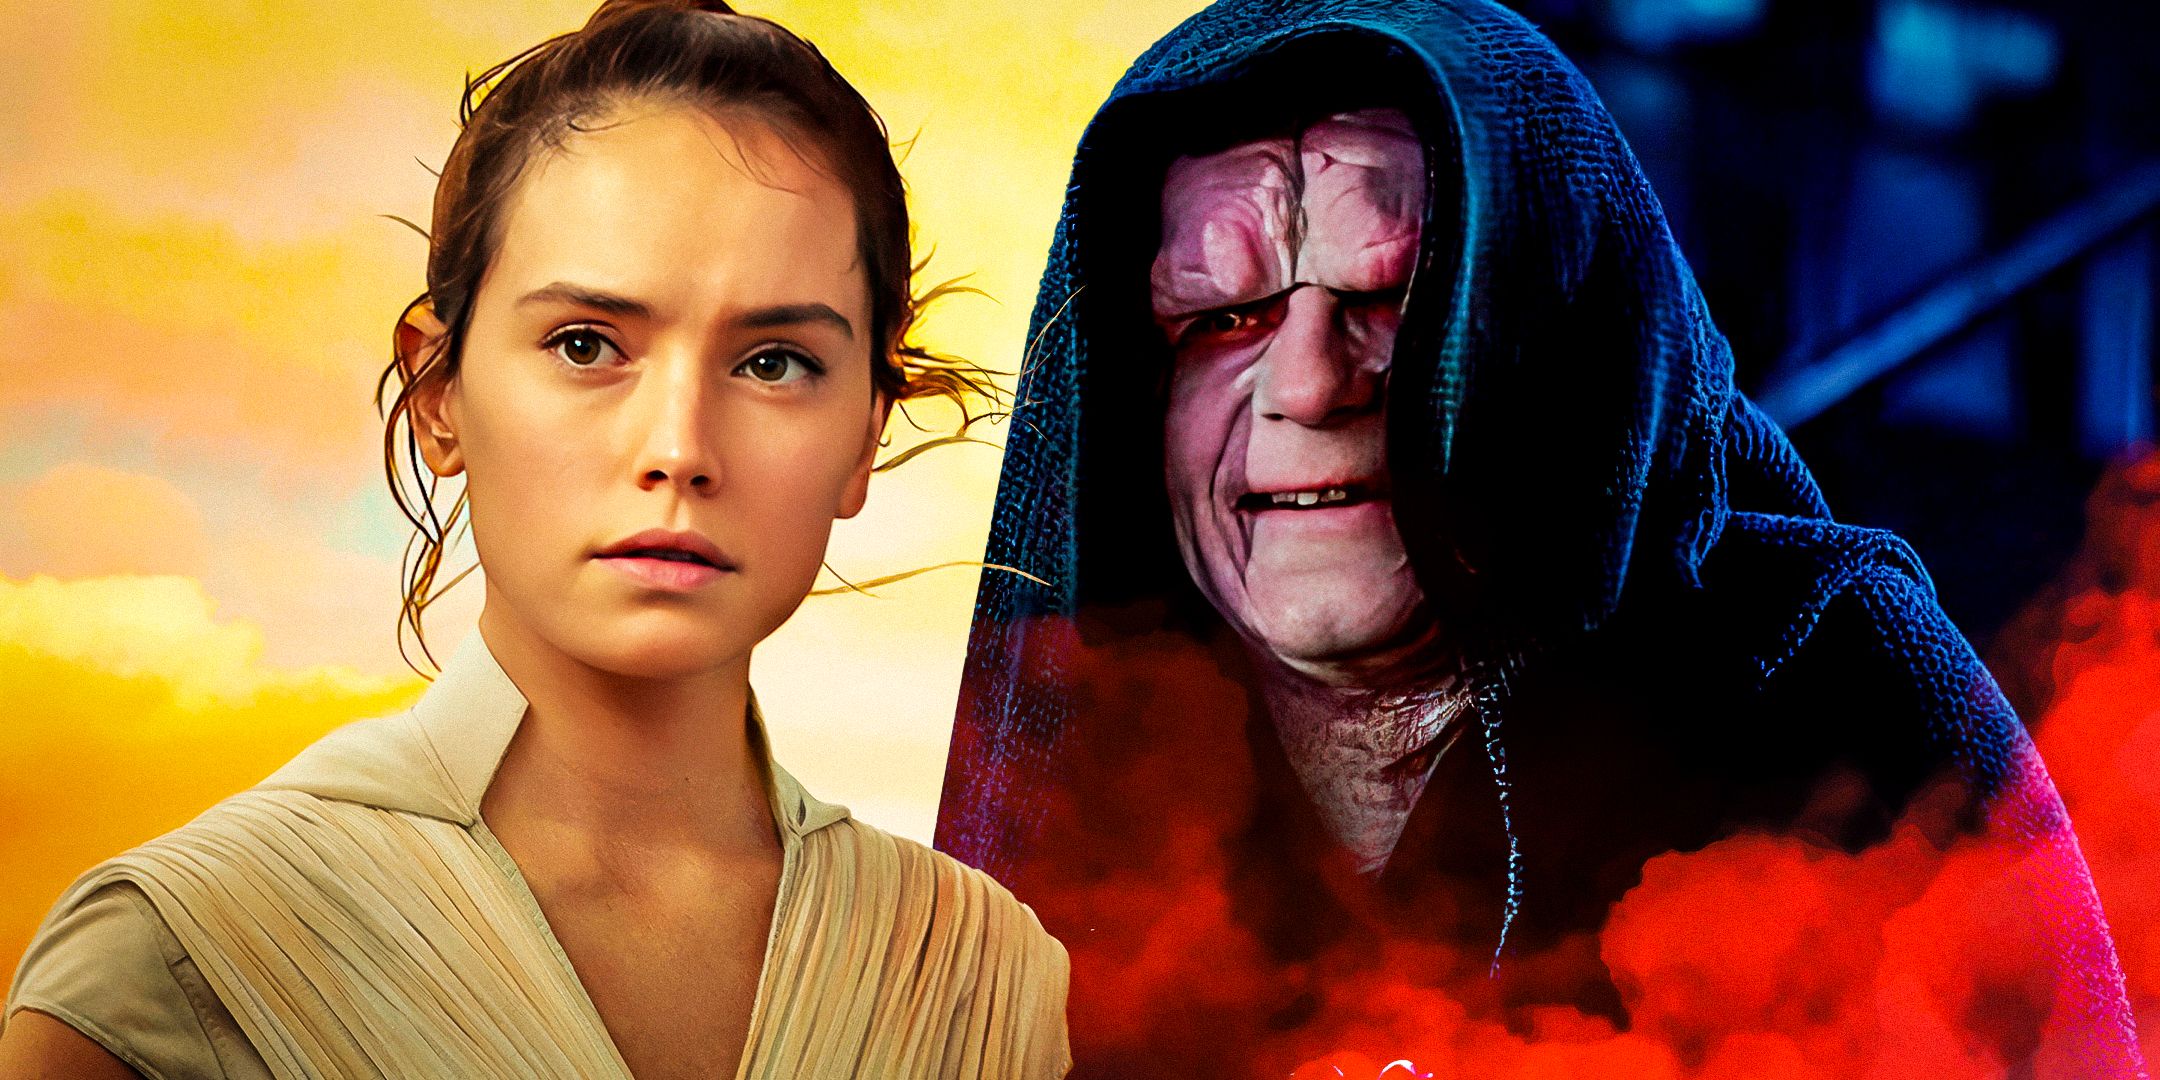 Rey looking curious to the left in front of a bright yellow background and Emperor Palpatine scowling under his hood to the right with red smoke around him in a combined image